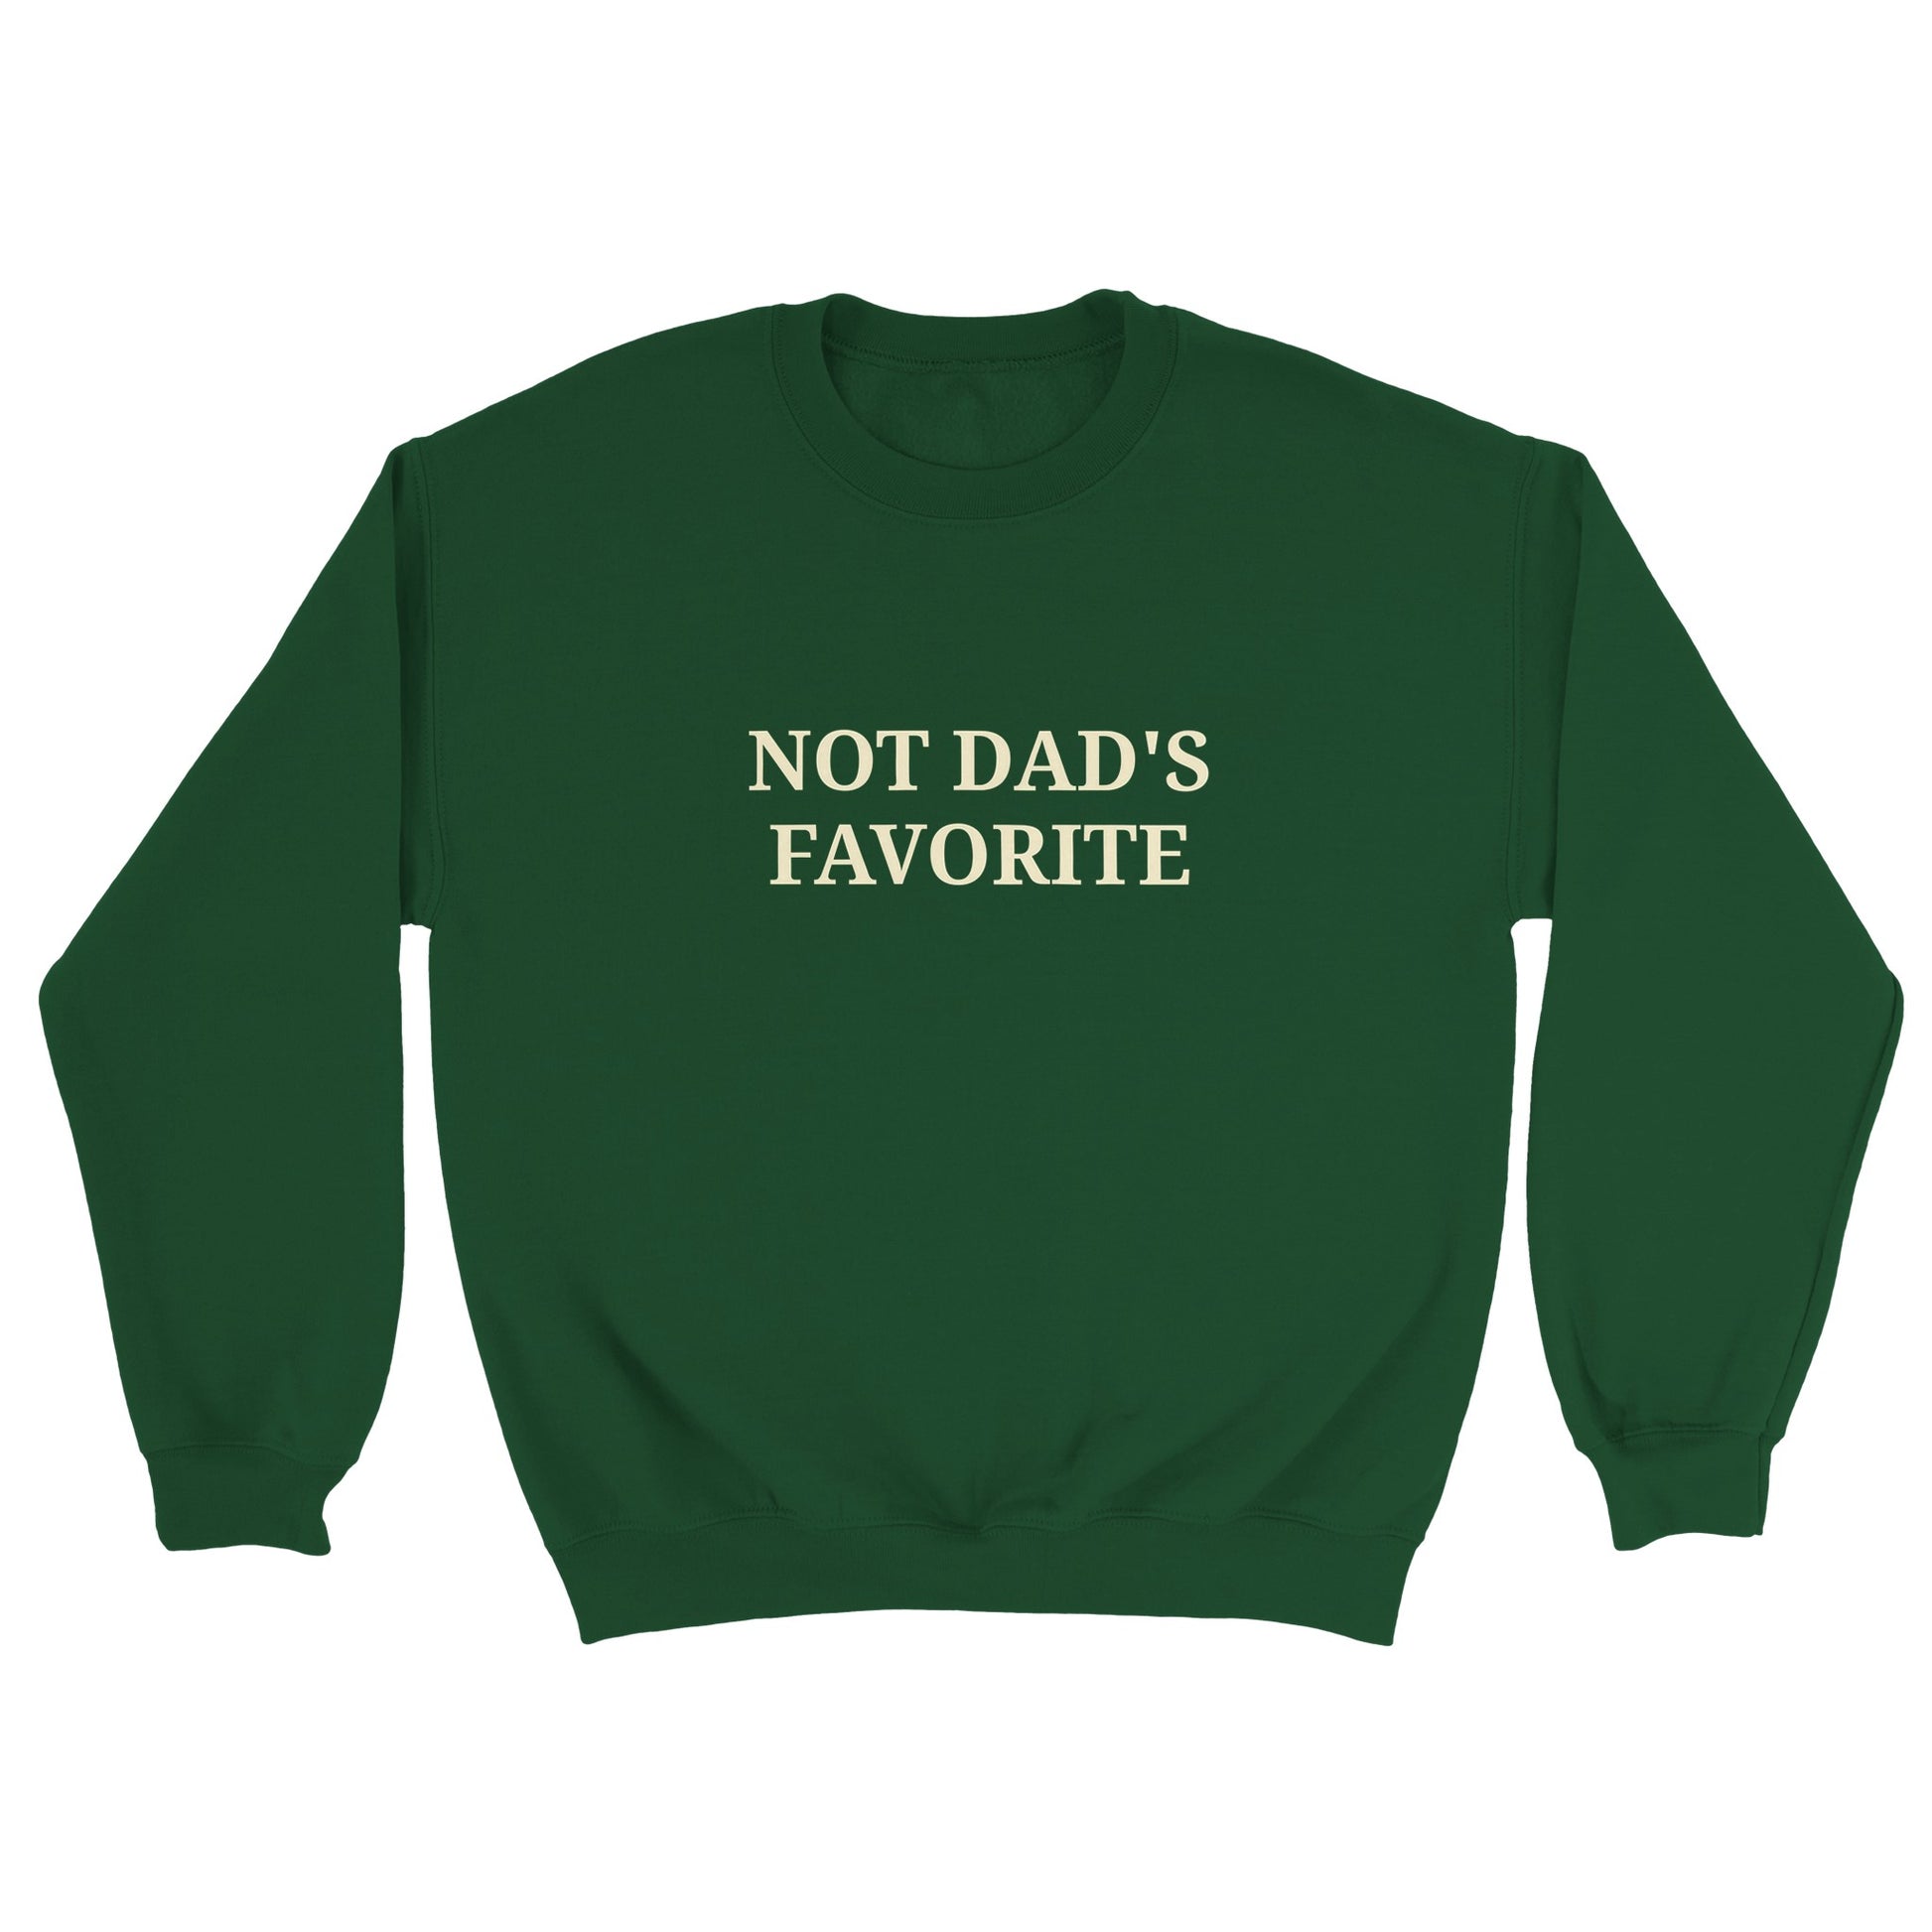 a green sweatshirt with "Not dad's favorite" written across the chest